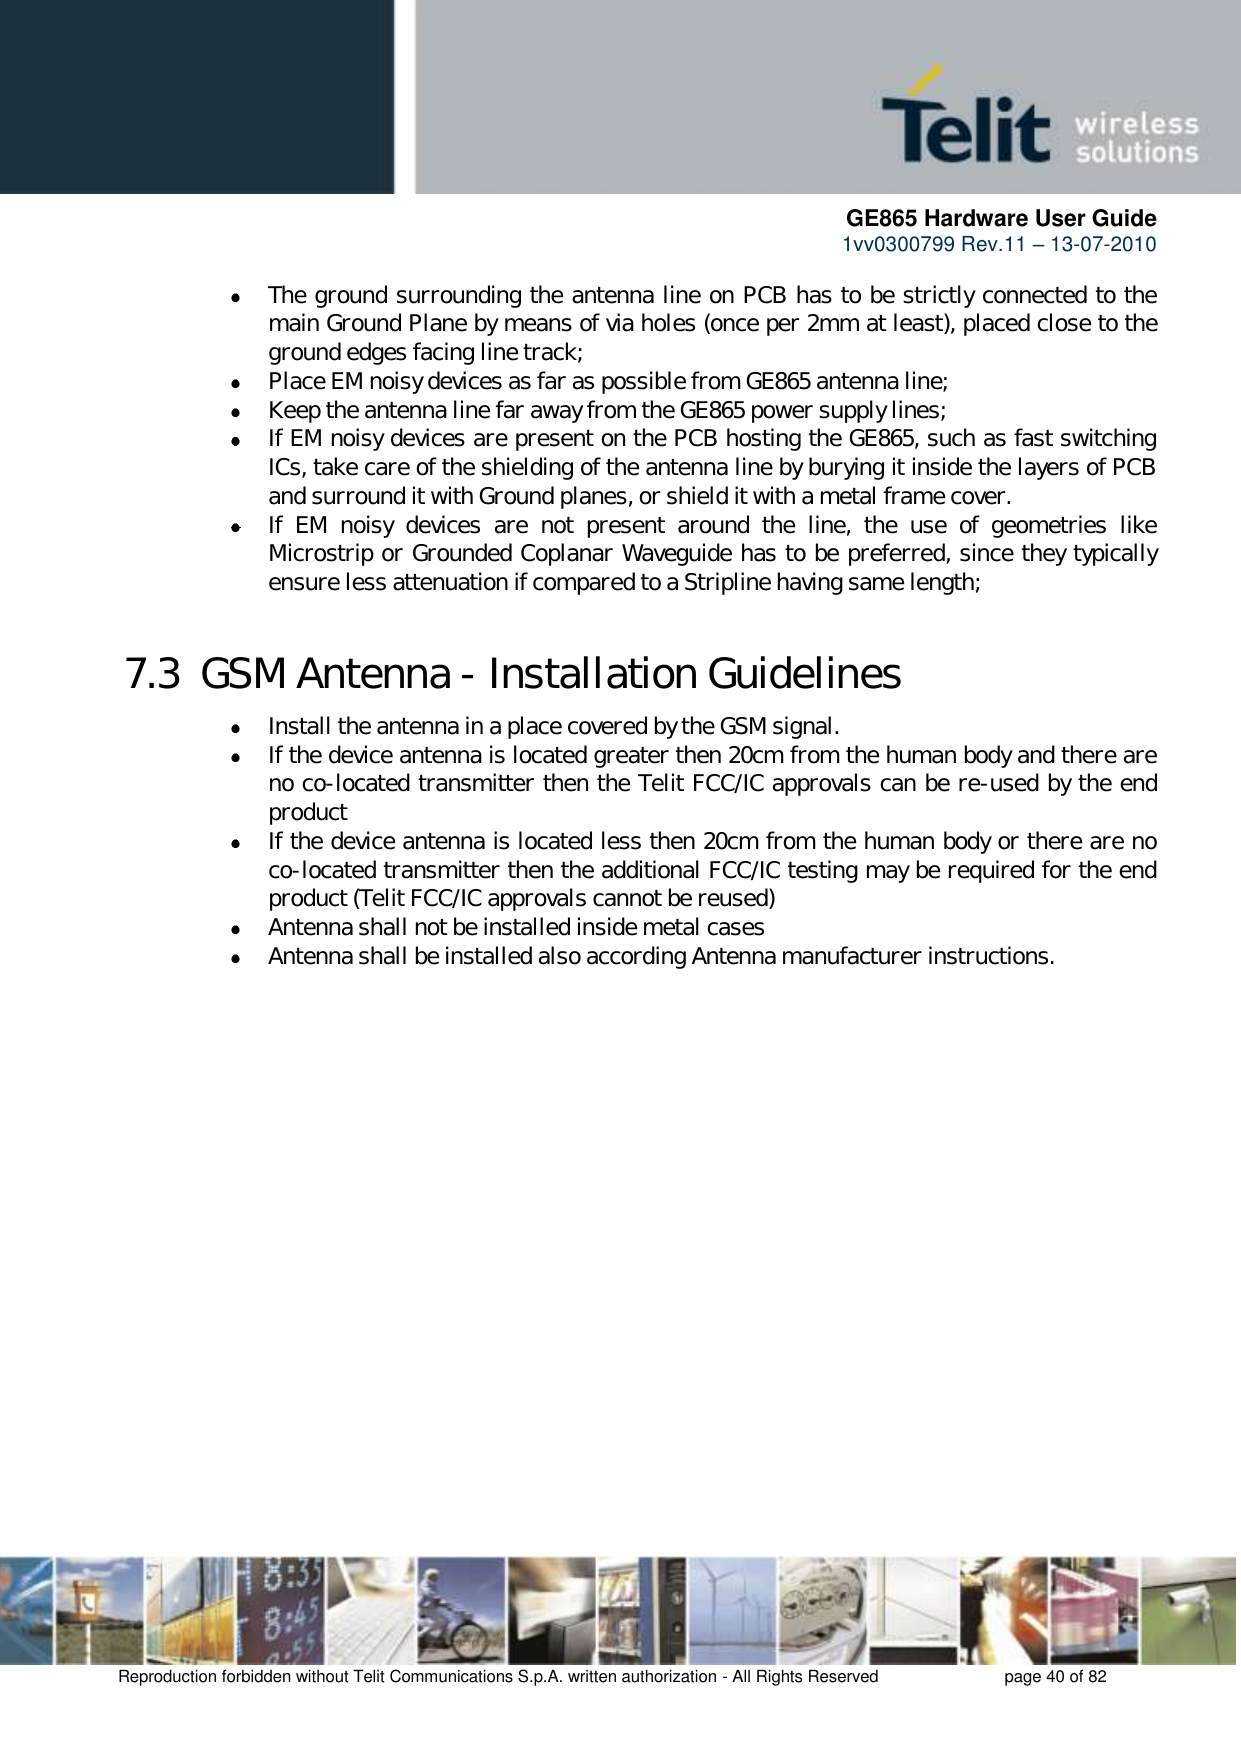      GE865 Hardware User Guide 1vv0300799 Rev.11 – 13-07-2010       Reproduction forbidden without Telit Communications S.p.A. written authorization - All Rights Reserved    page 40 of 82   The ground surrounding the antenna line on PCB has to be strictly connected to the main Ground Plane by means of via holes (once per 2mm at least), placed close to the ground edges facing line track;  Place EM noisy devices as far as possible from GE865 antenna line;  Keep the antenna line far away from the GE865 power supply lines;  If EM noisy devices are present on the PCB hosting the GE865, such as fast switching ICs, take care of the shielding of the antenna line by burying it inside the layers of PCB and surround it with Ground planes, or shield it with a metal frame cover.  If  EM  noisy  devices  are  not  present  around  the  line,  the  use  of  geometries  like Microstrip or Grounded Coplanar Waveguide has to be preferred, since they typically ensure less attenuation if compared to a Stripline having same length; 7.3  GSM Antenna - Installation Guidelines  Install the antenna in a place covered by the GSM signal.  If the device antenna is located greater then 20cm from the human body and there are no co-located transmitter then the Telit FCC/IC approvals can be re-used by the end product  If the device antenna is located less then 20cm from the human body or there are no co-located transmitter then the additional FCC/IC testing may be required for the end product (Telit FCC/IC approvals cannot be reused)  Antenna shall not be installed inside metal cases   Antenna shall be installed also according Antenna manufacturer instructions.   